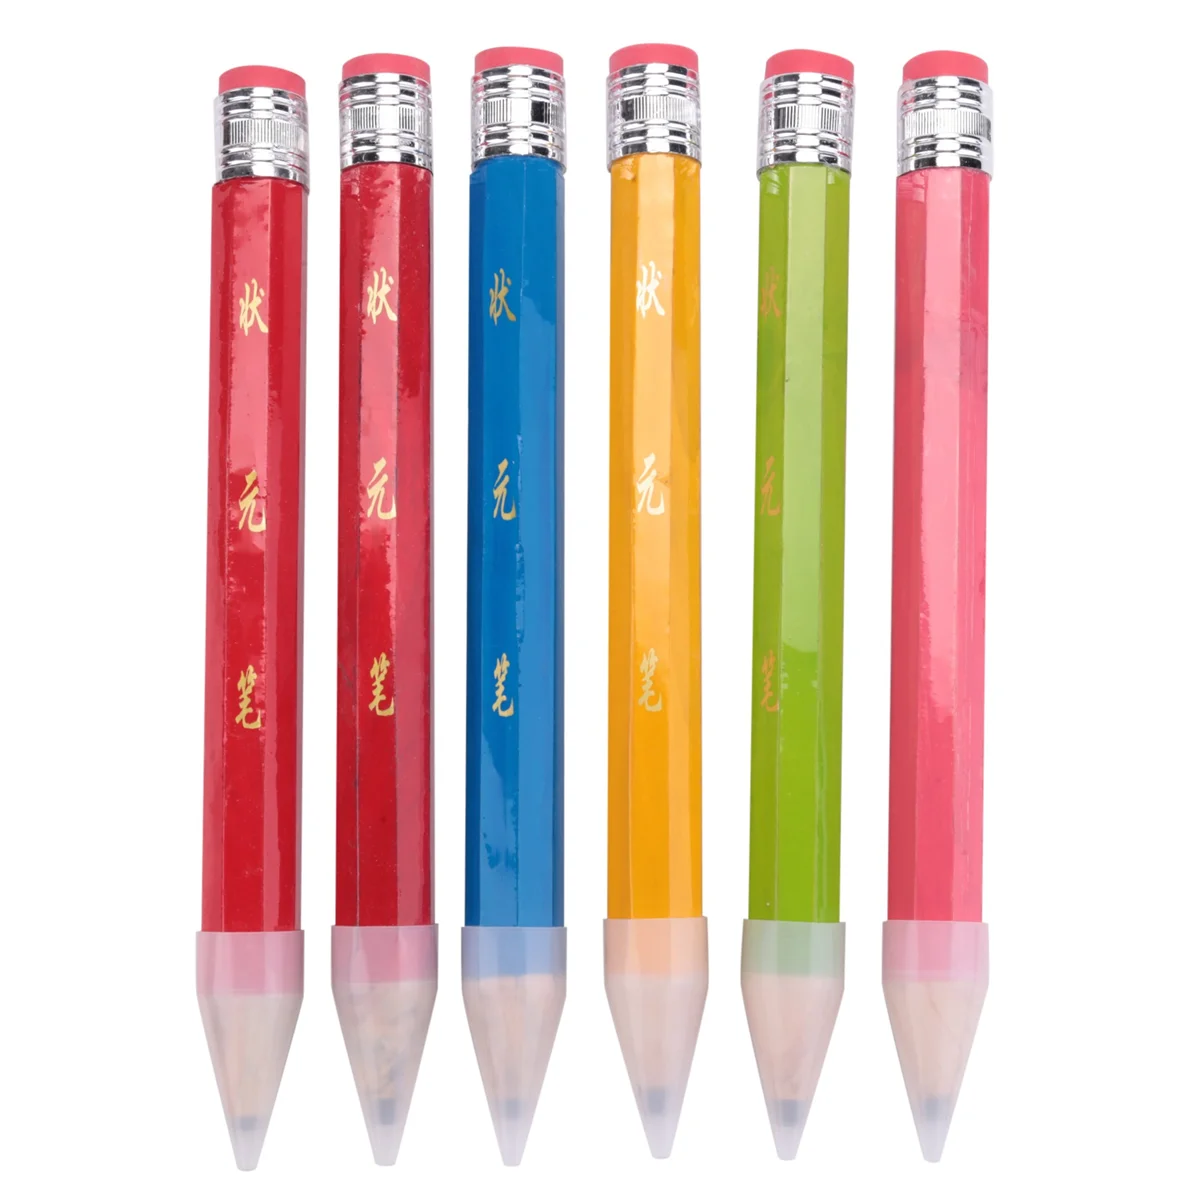 

6 Pcs Wooden Jumbo Pencils for Prop, Funny Big Pencil Huge Giant Pencil 14 Inch Pencil for Home and School Supplies